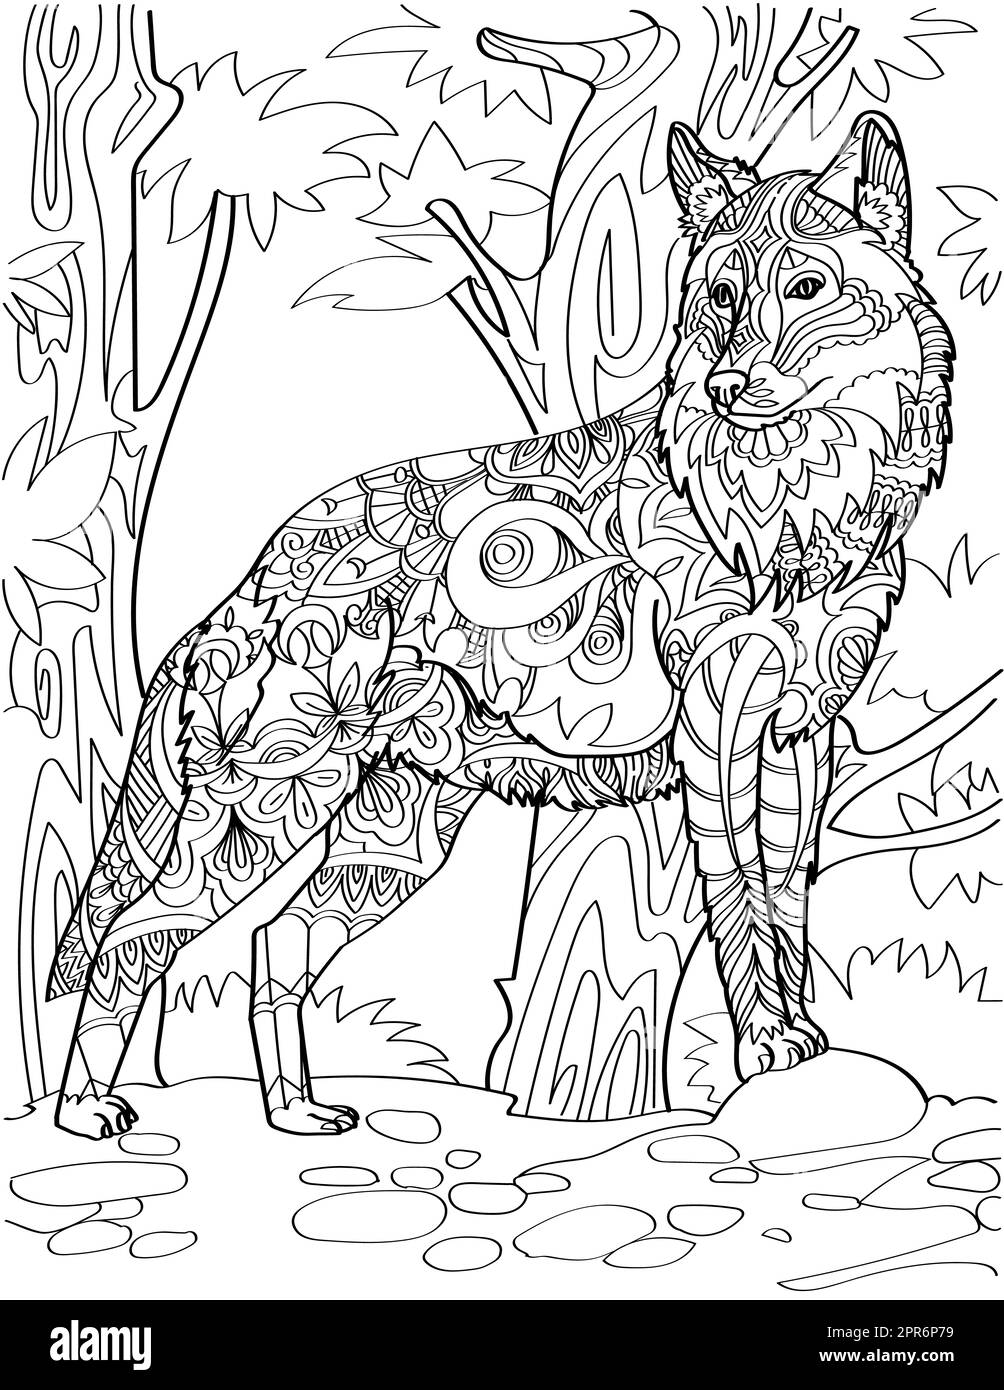 Wolf Standing Looking Sideward In Forest Background Line Drawing. Stock Photo